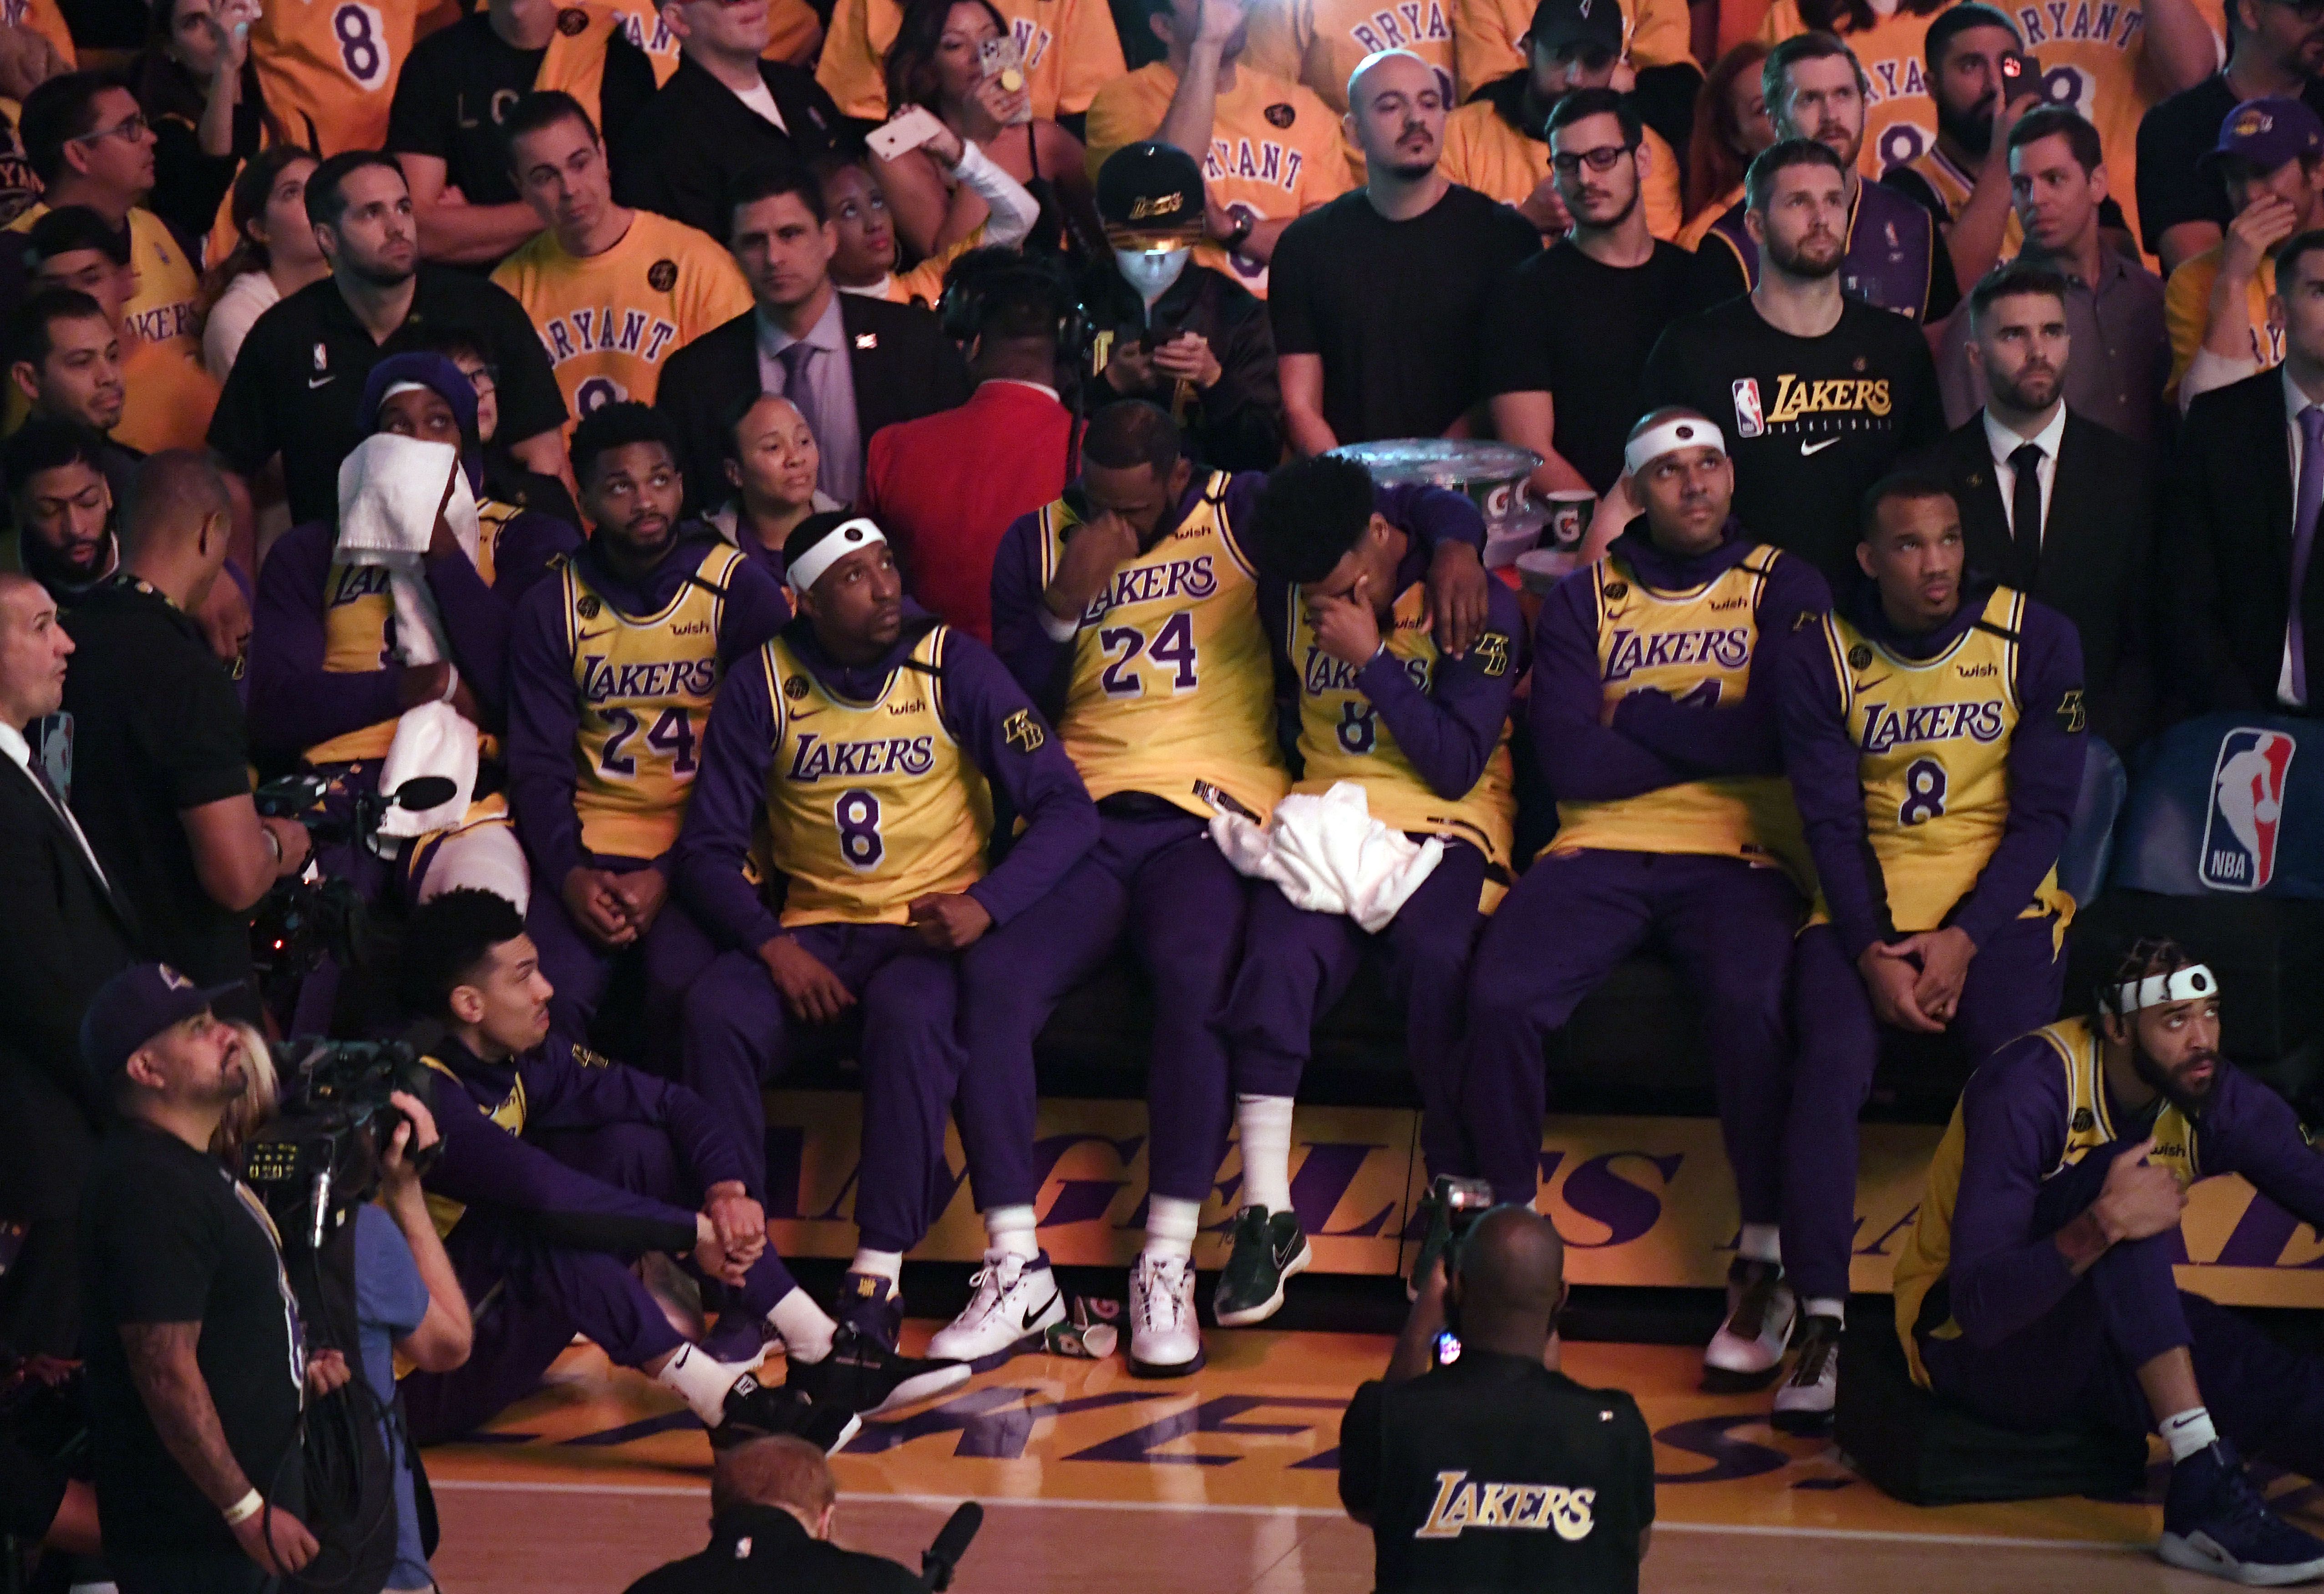 In this image, the Lakers sit next to each other, offering emotional support during the pregame ceremony, sitting courtside and wearing Kobe jerseys 